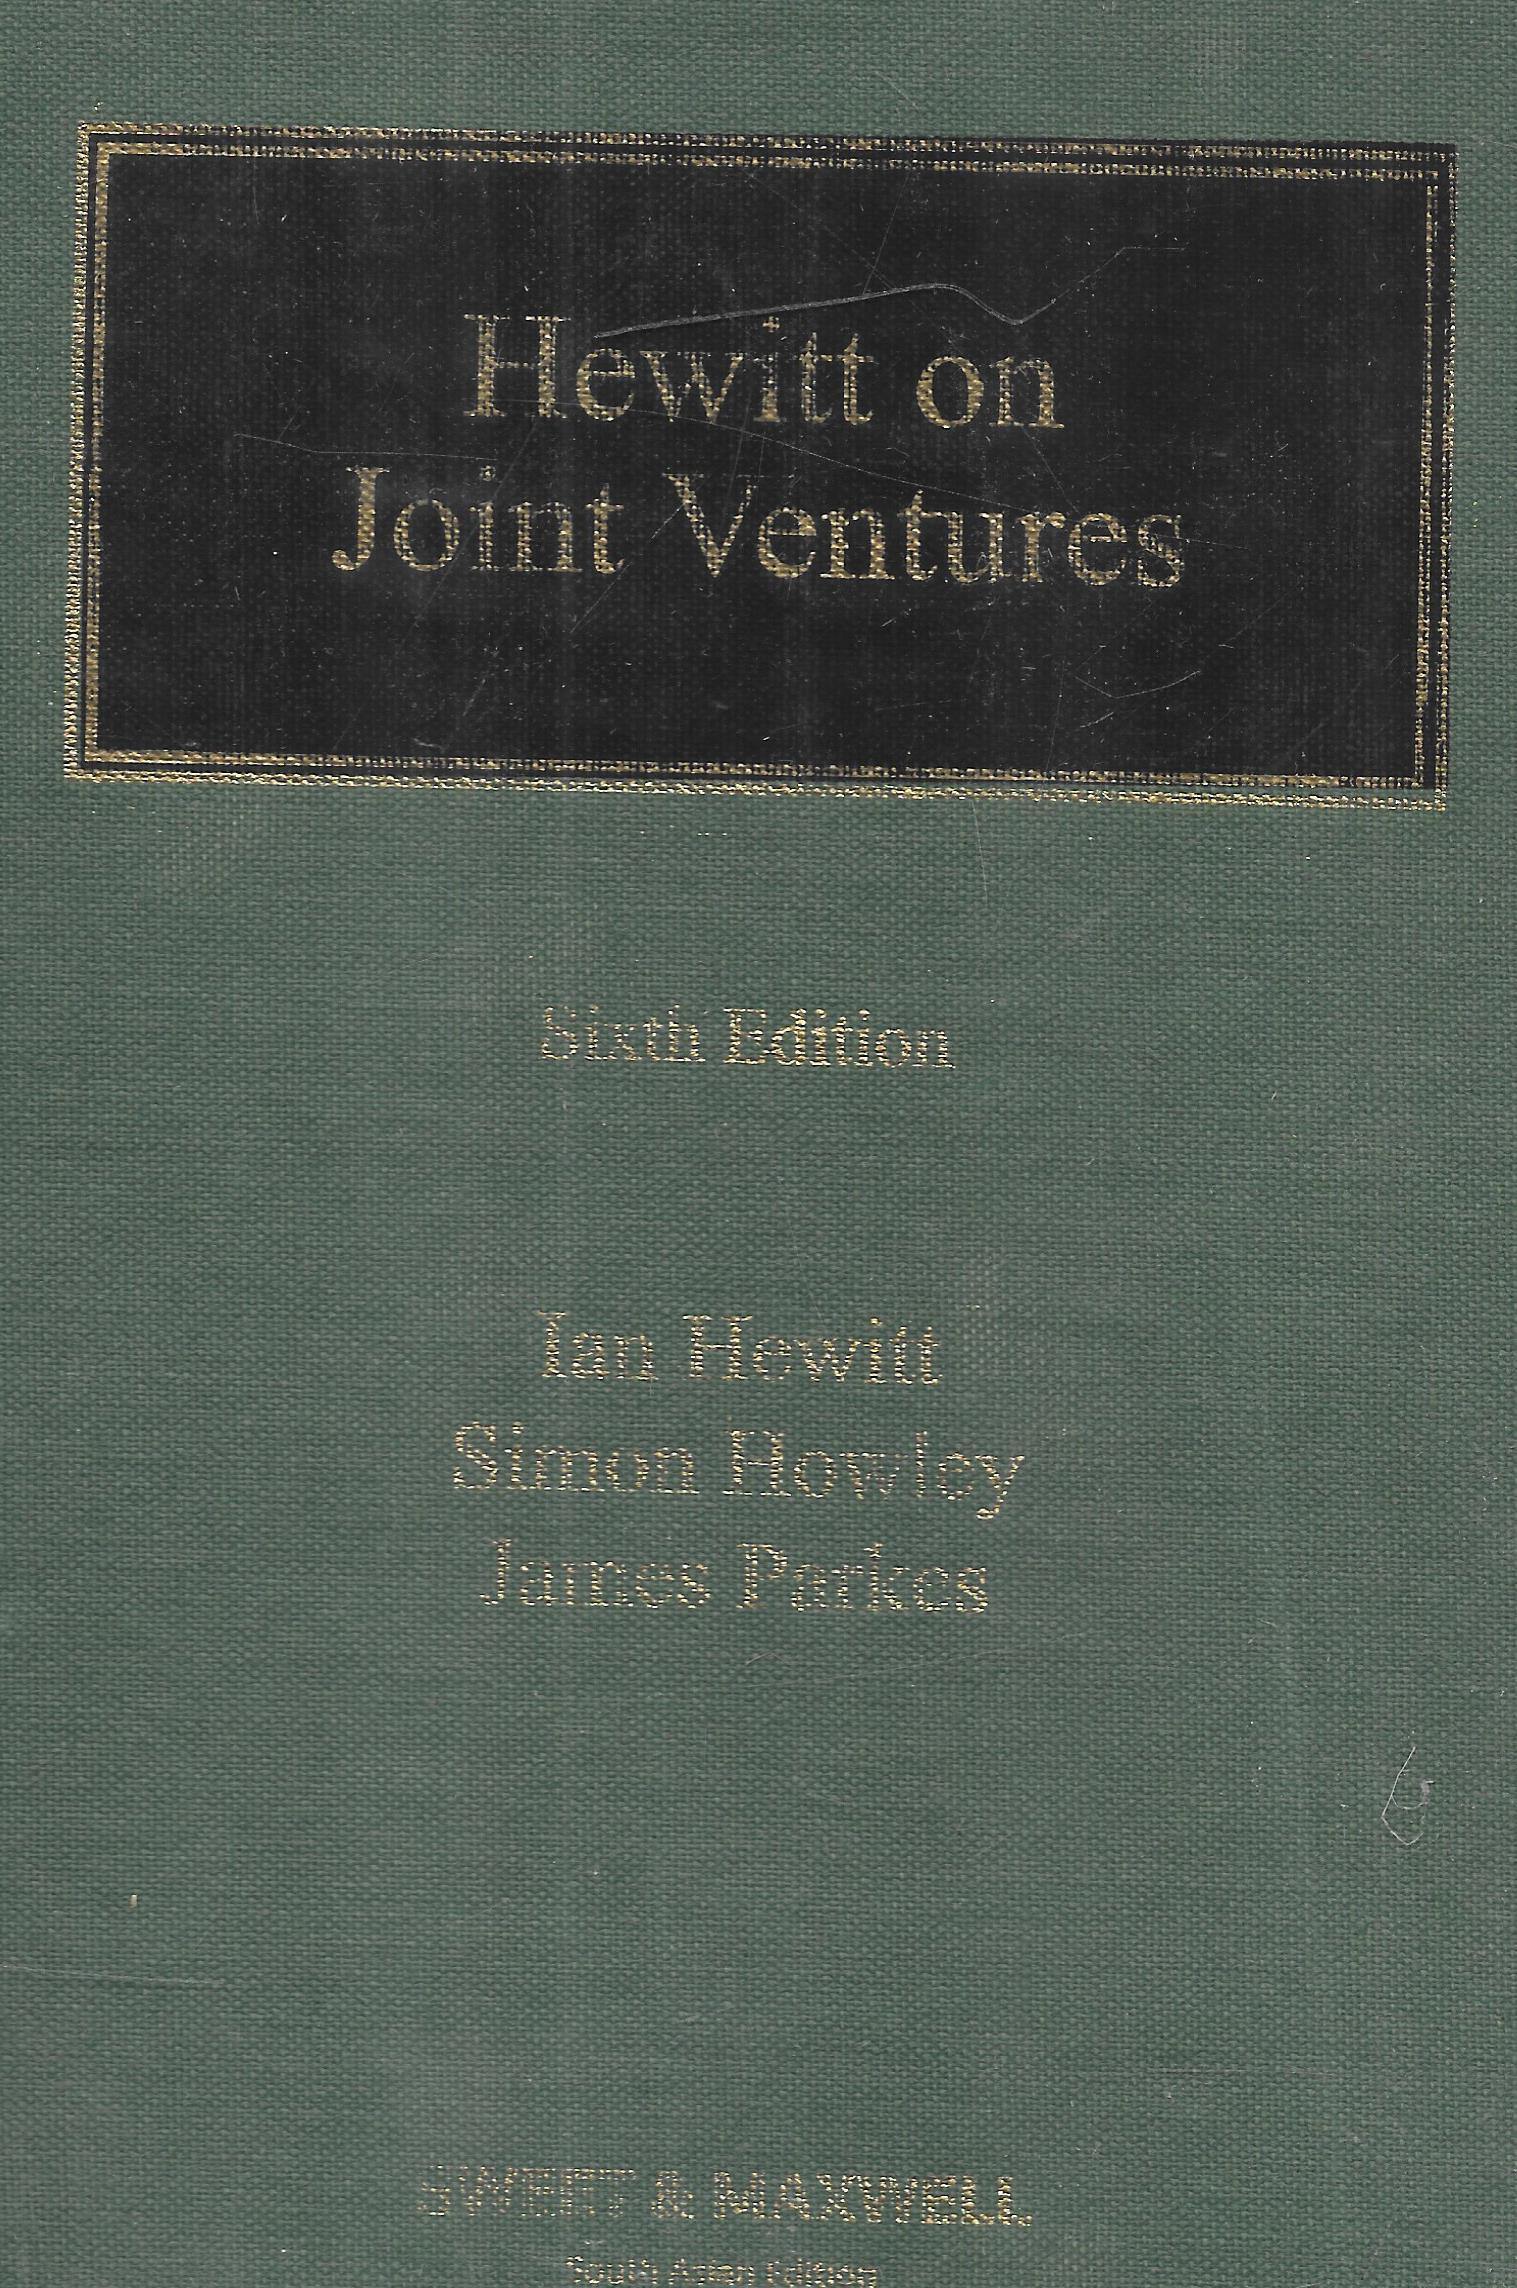 Hewitt on Joint Ventures - M&J Services